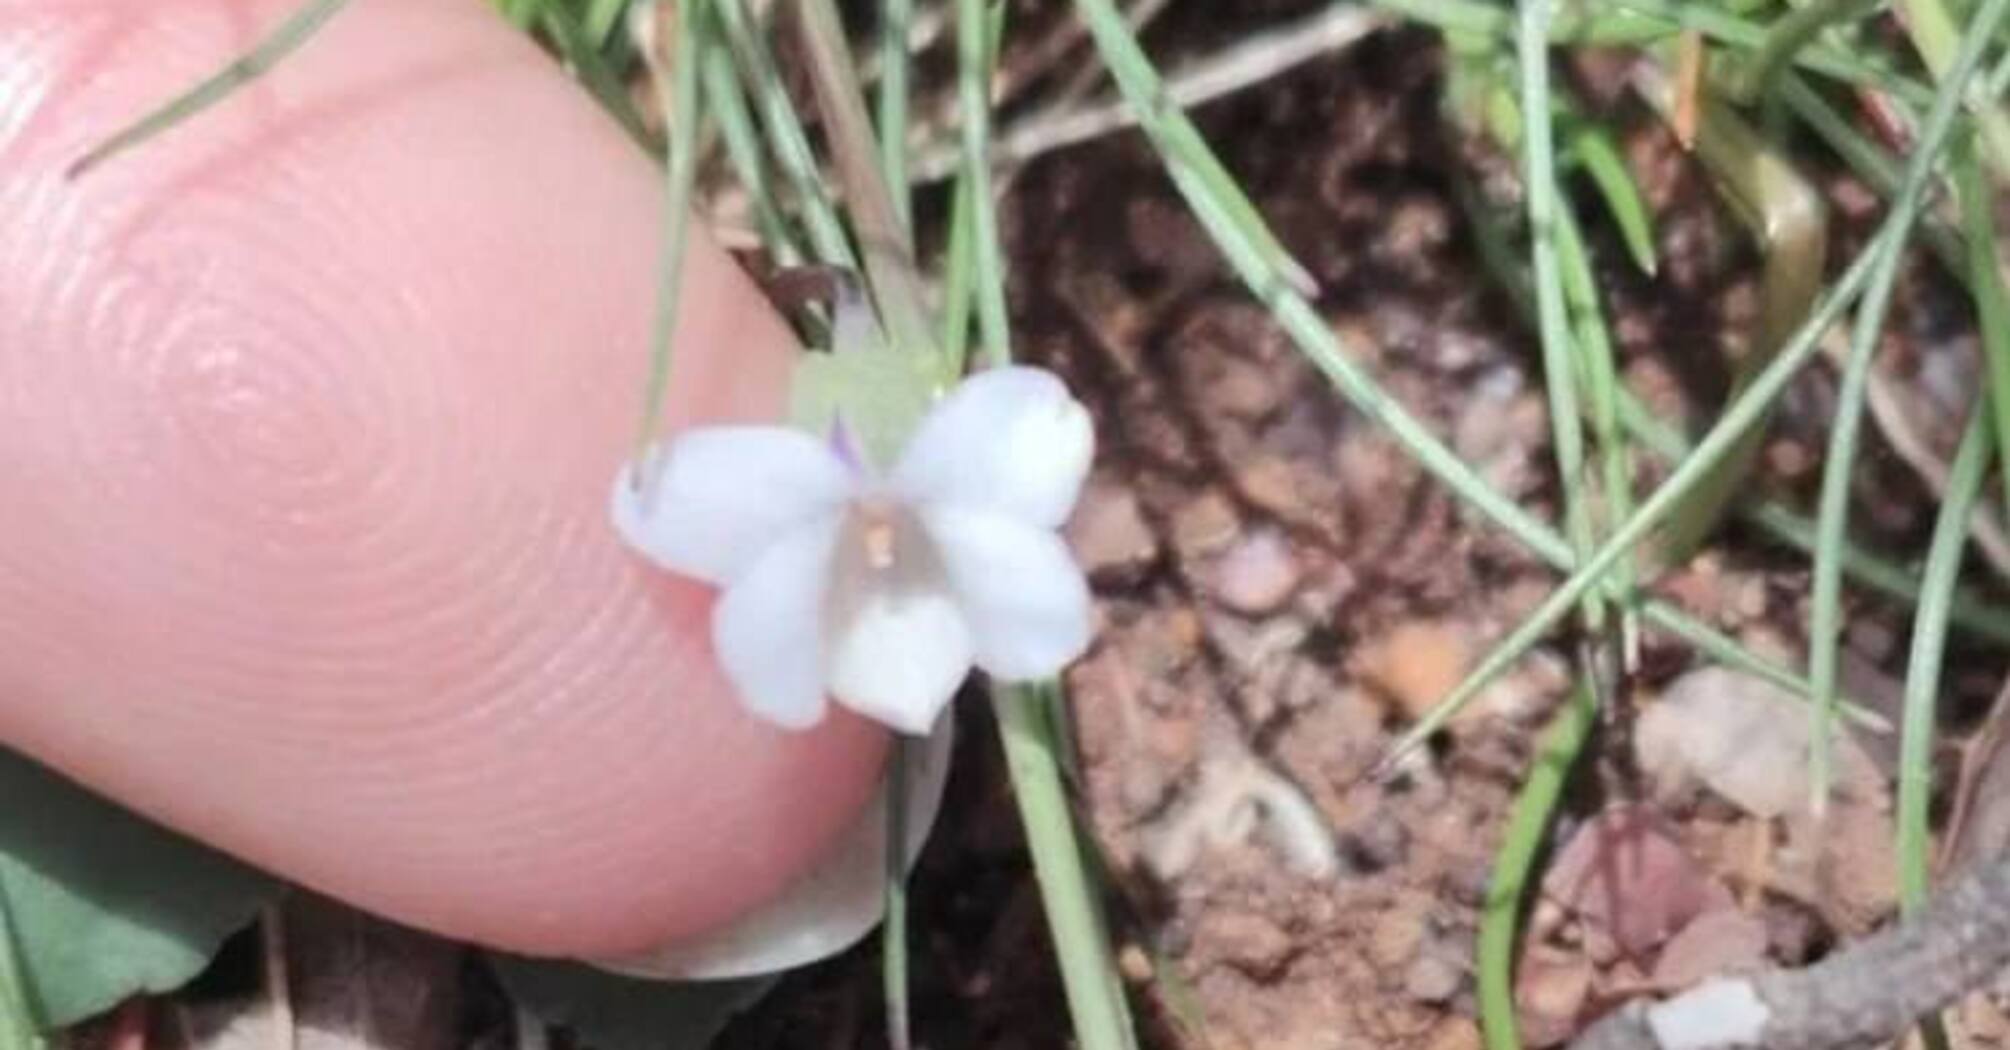 In Tasmania, a rare dwarf violet has been discovered for the first time in 200 years